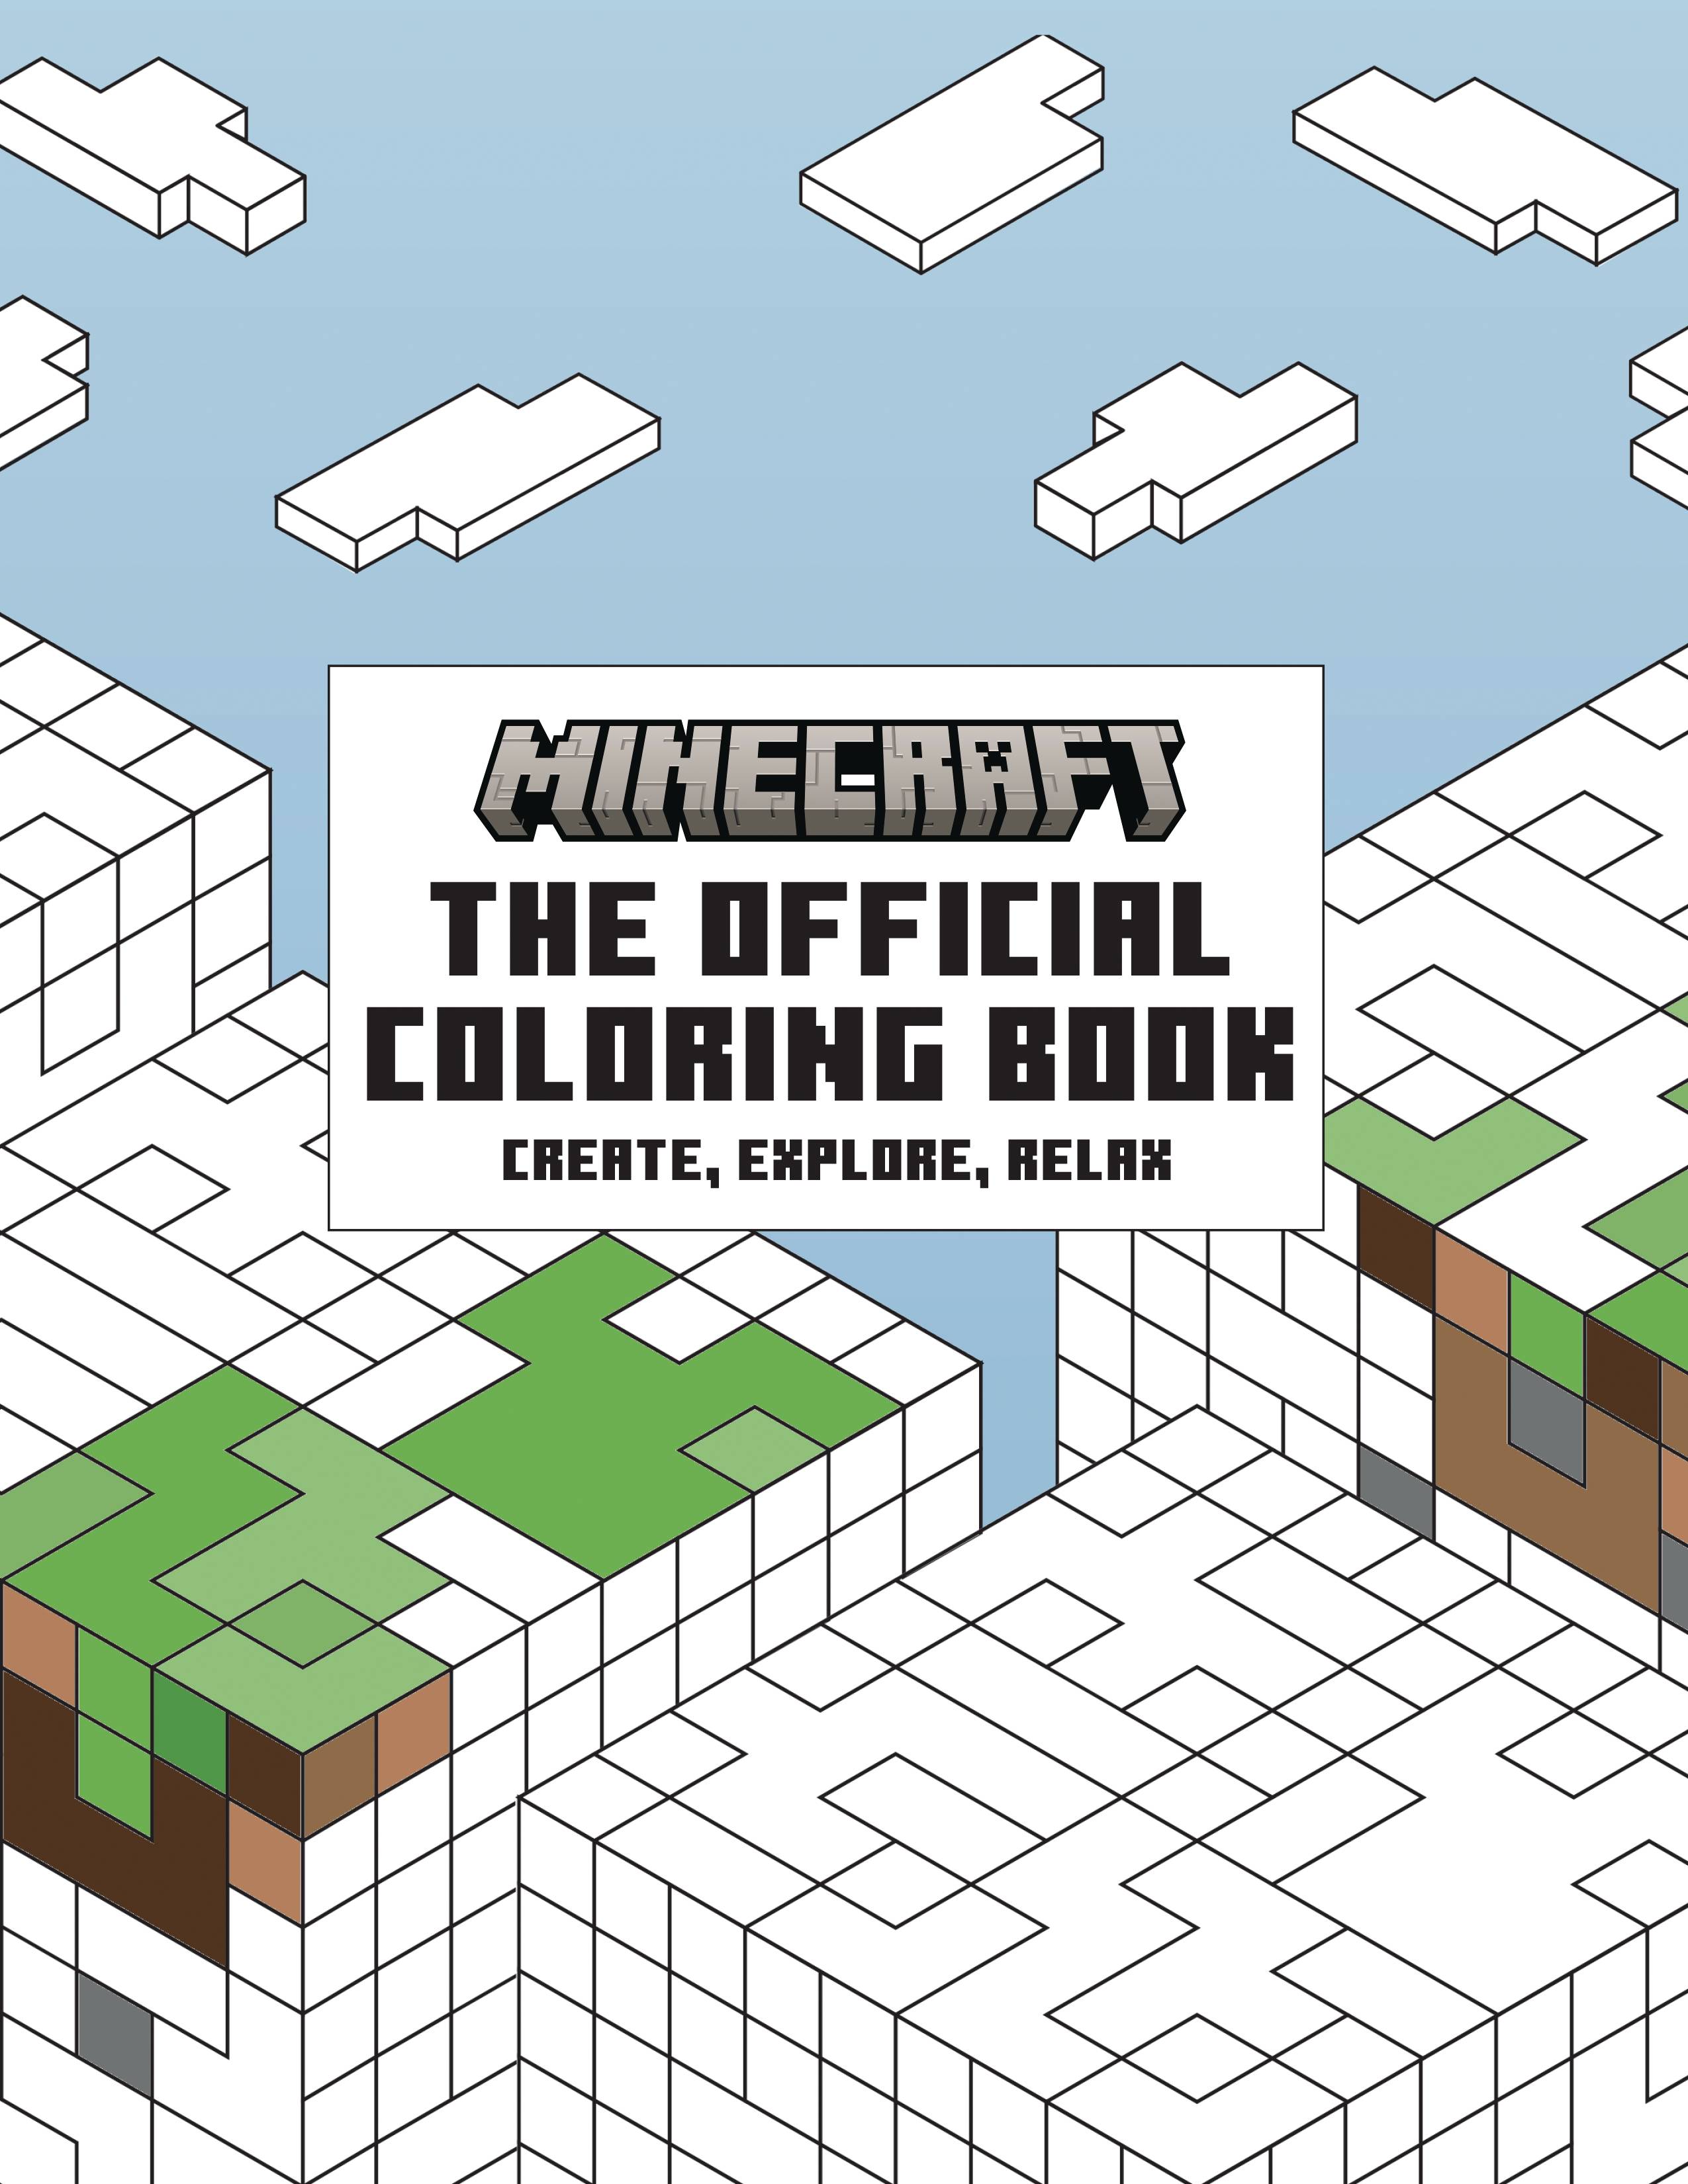 MINECRAFT OFFICIAL COLORING BOOK